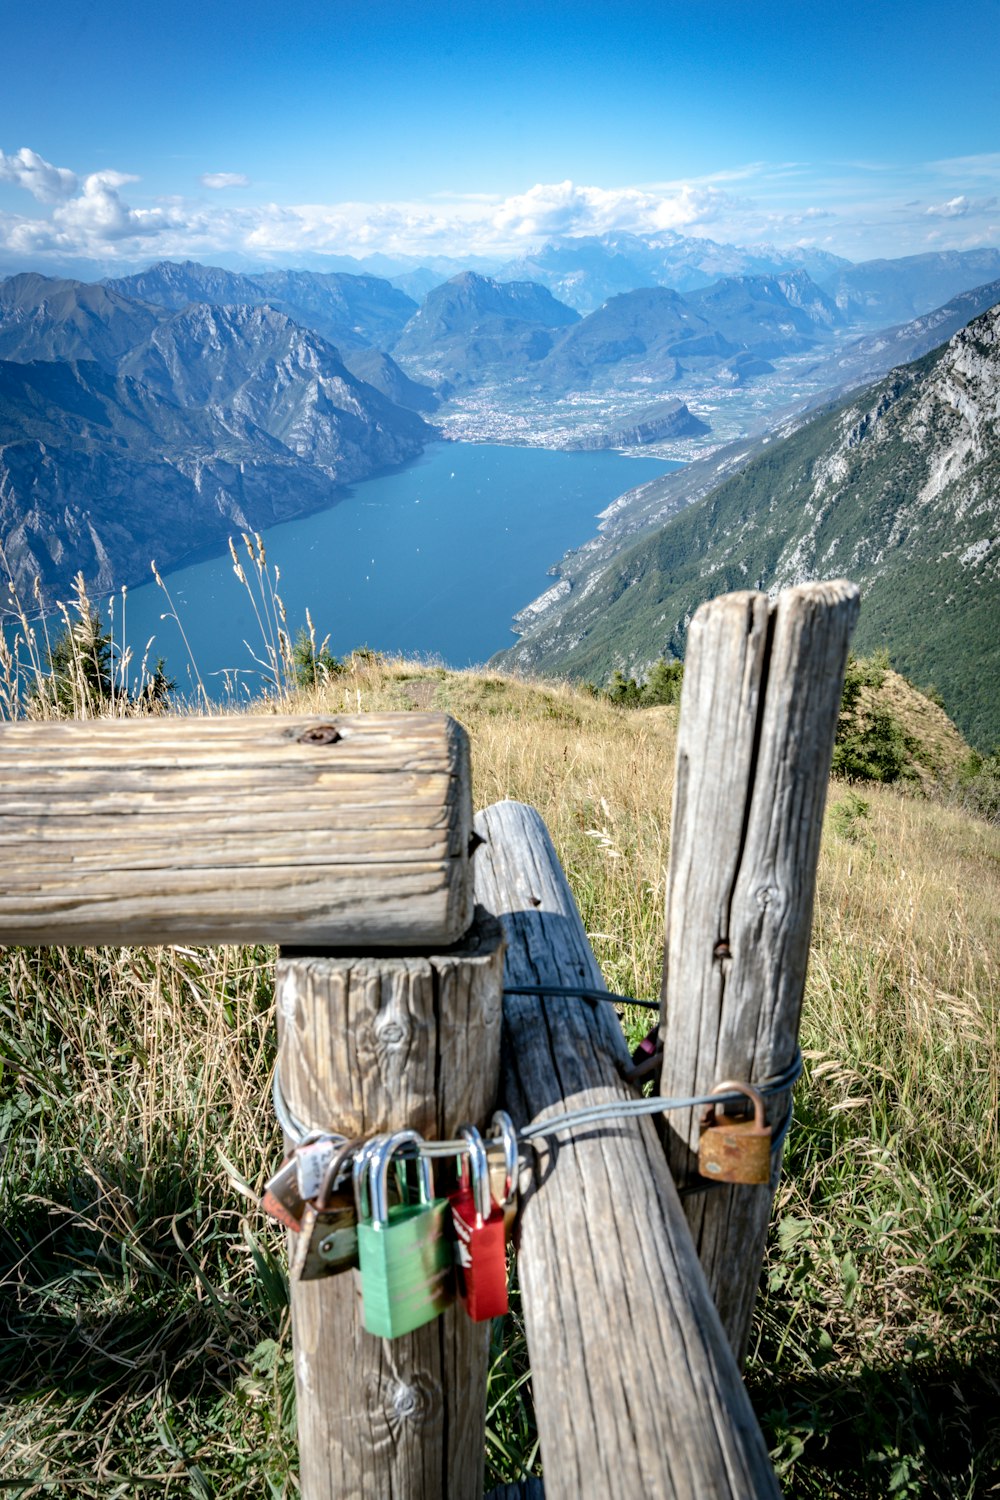 a wooden fence overlooking a lake